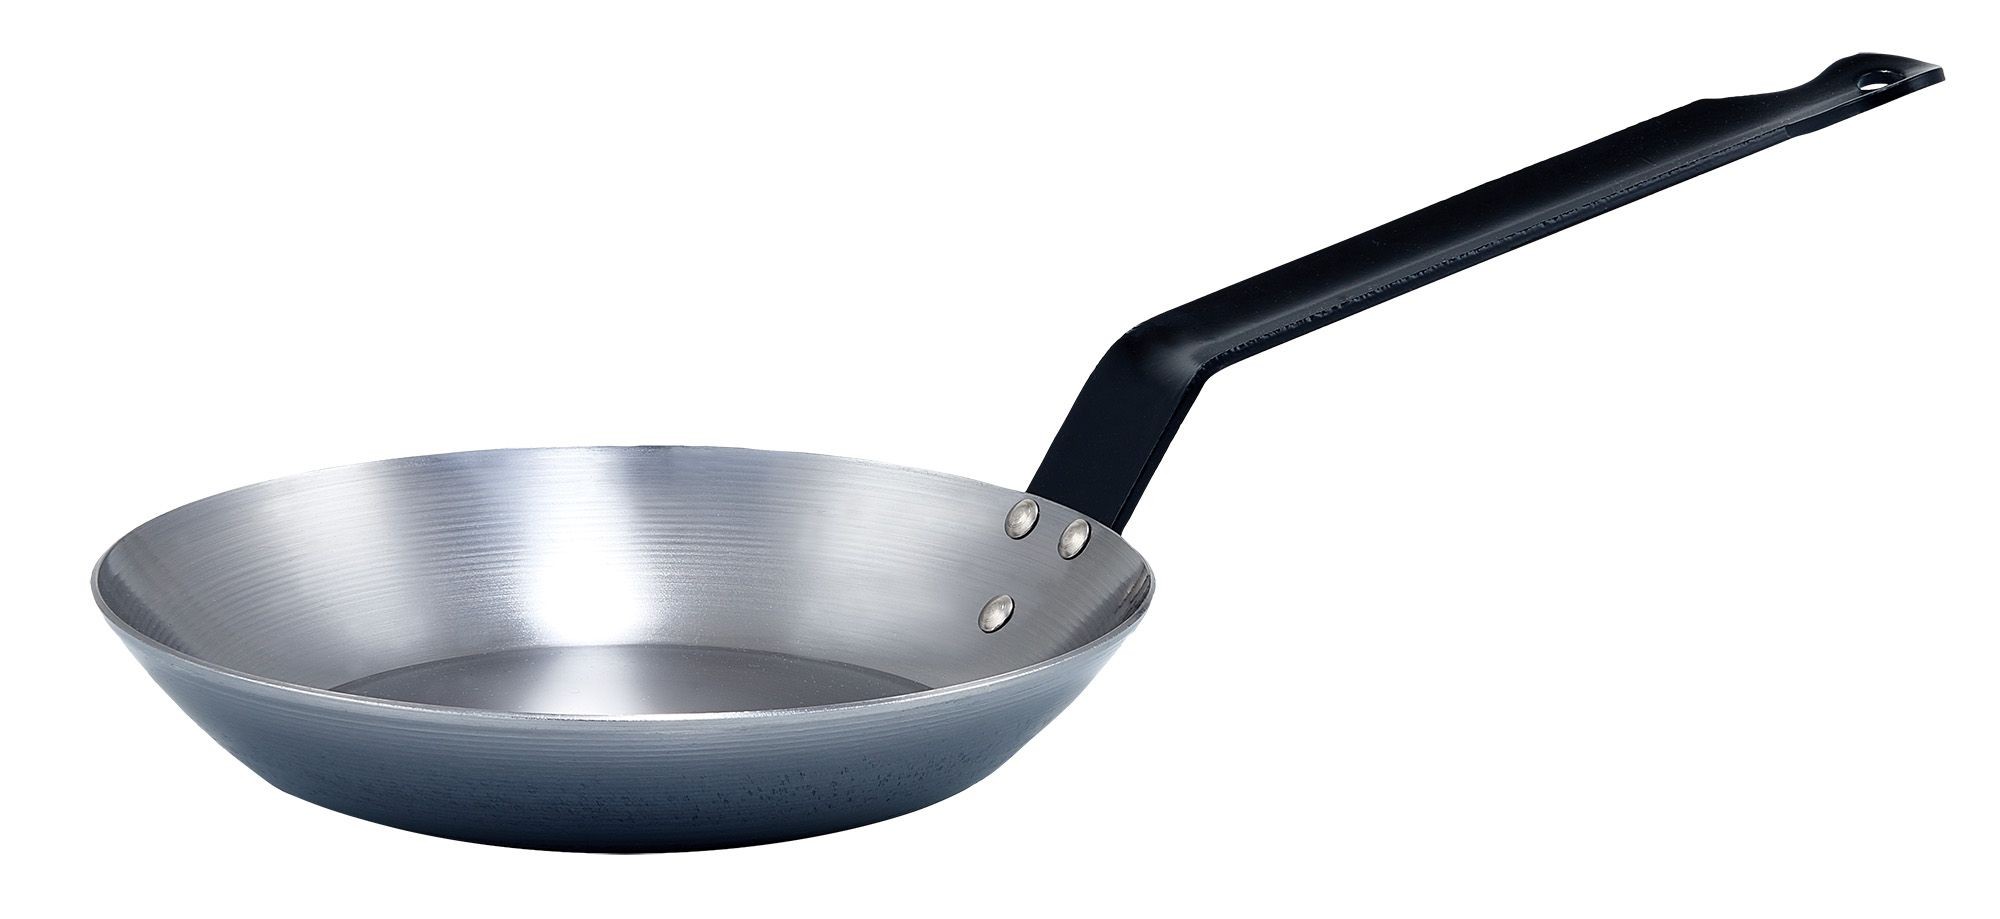 Winco CSFP-8 French Style Carbon Steel  Fry Pan 8-5/8"